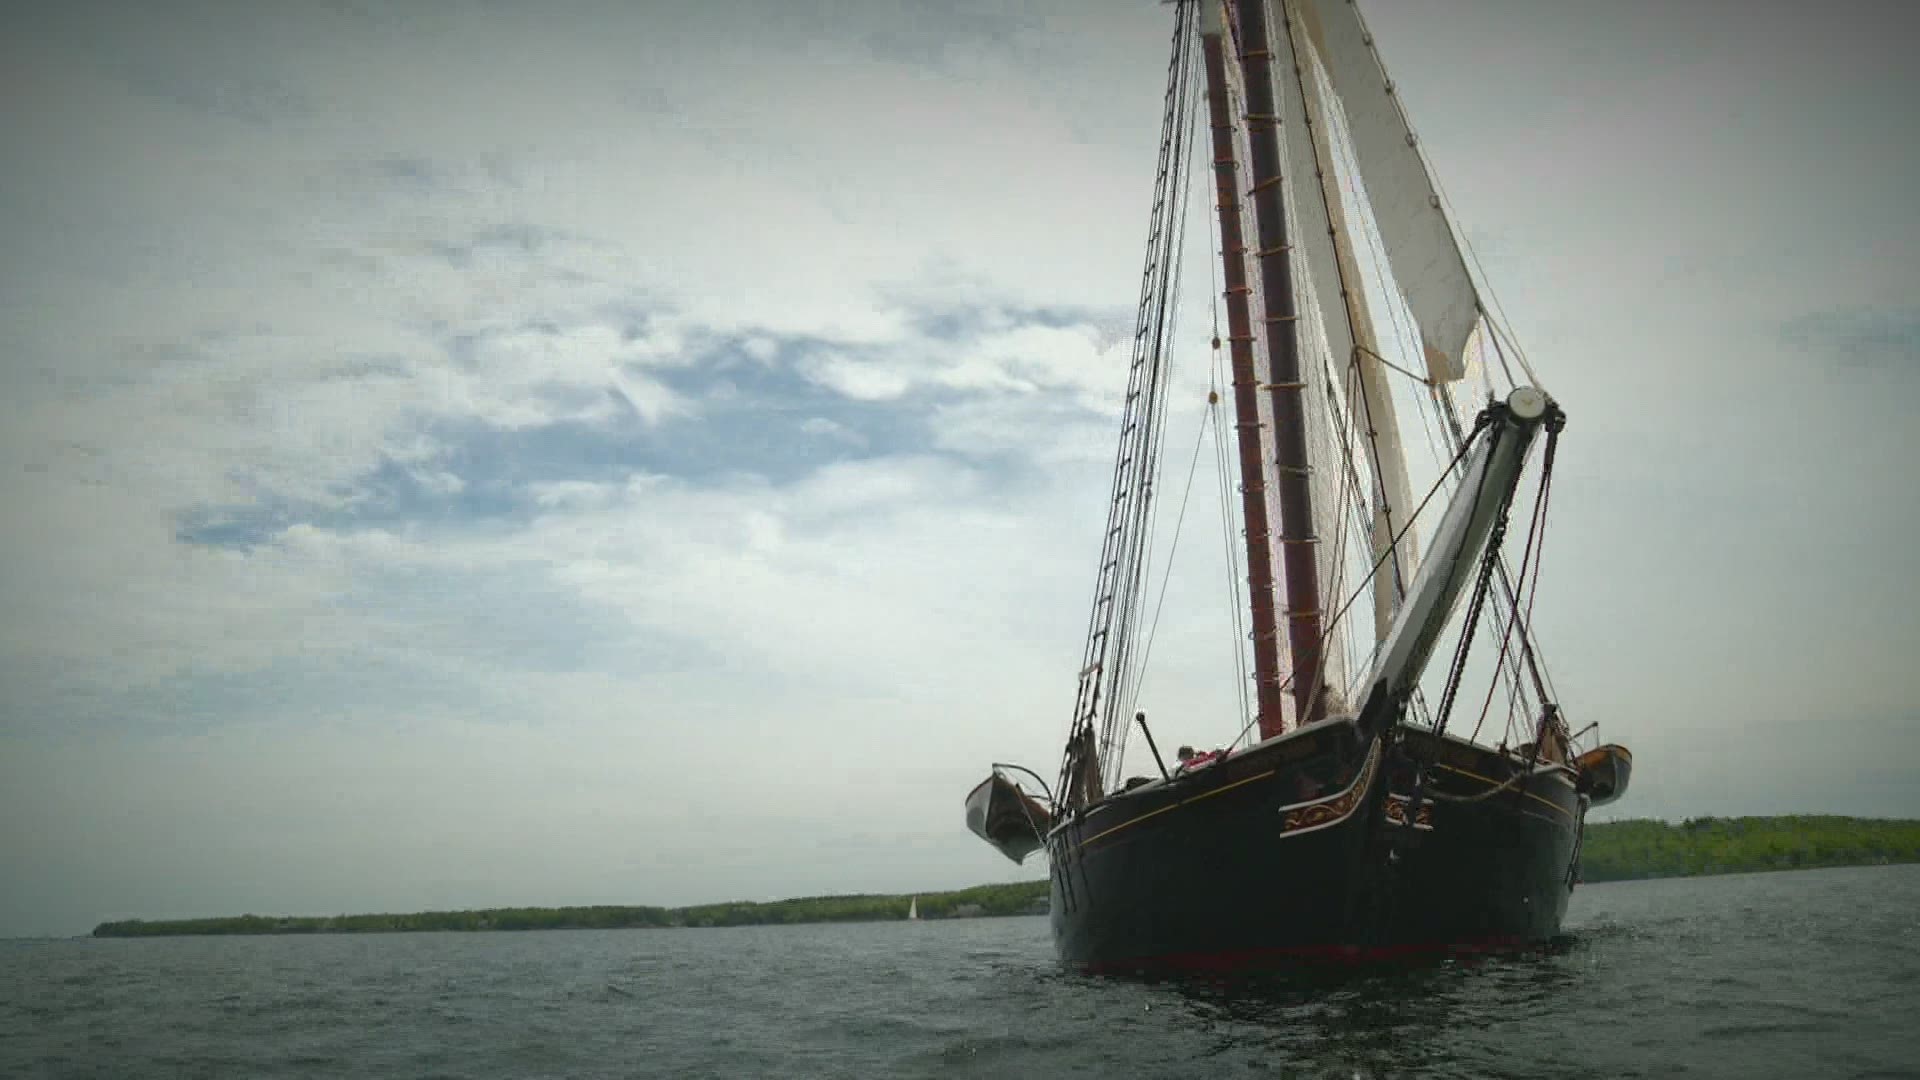 Maine is home to two of the oldest schooners still in commercial use, the Lewis R. French and the Stephen Taber. Both have been sailing for 150 years.